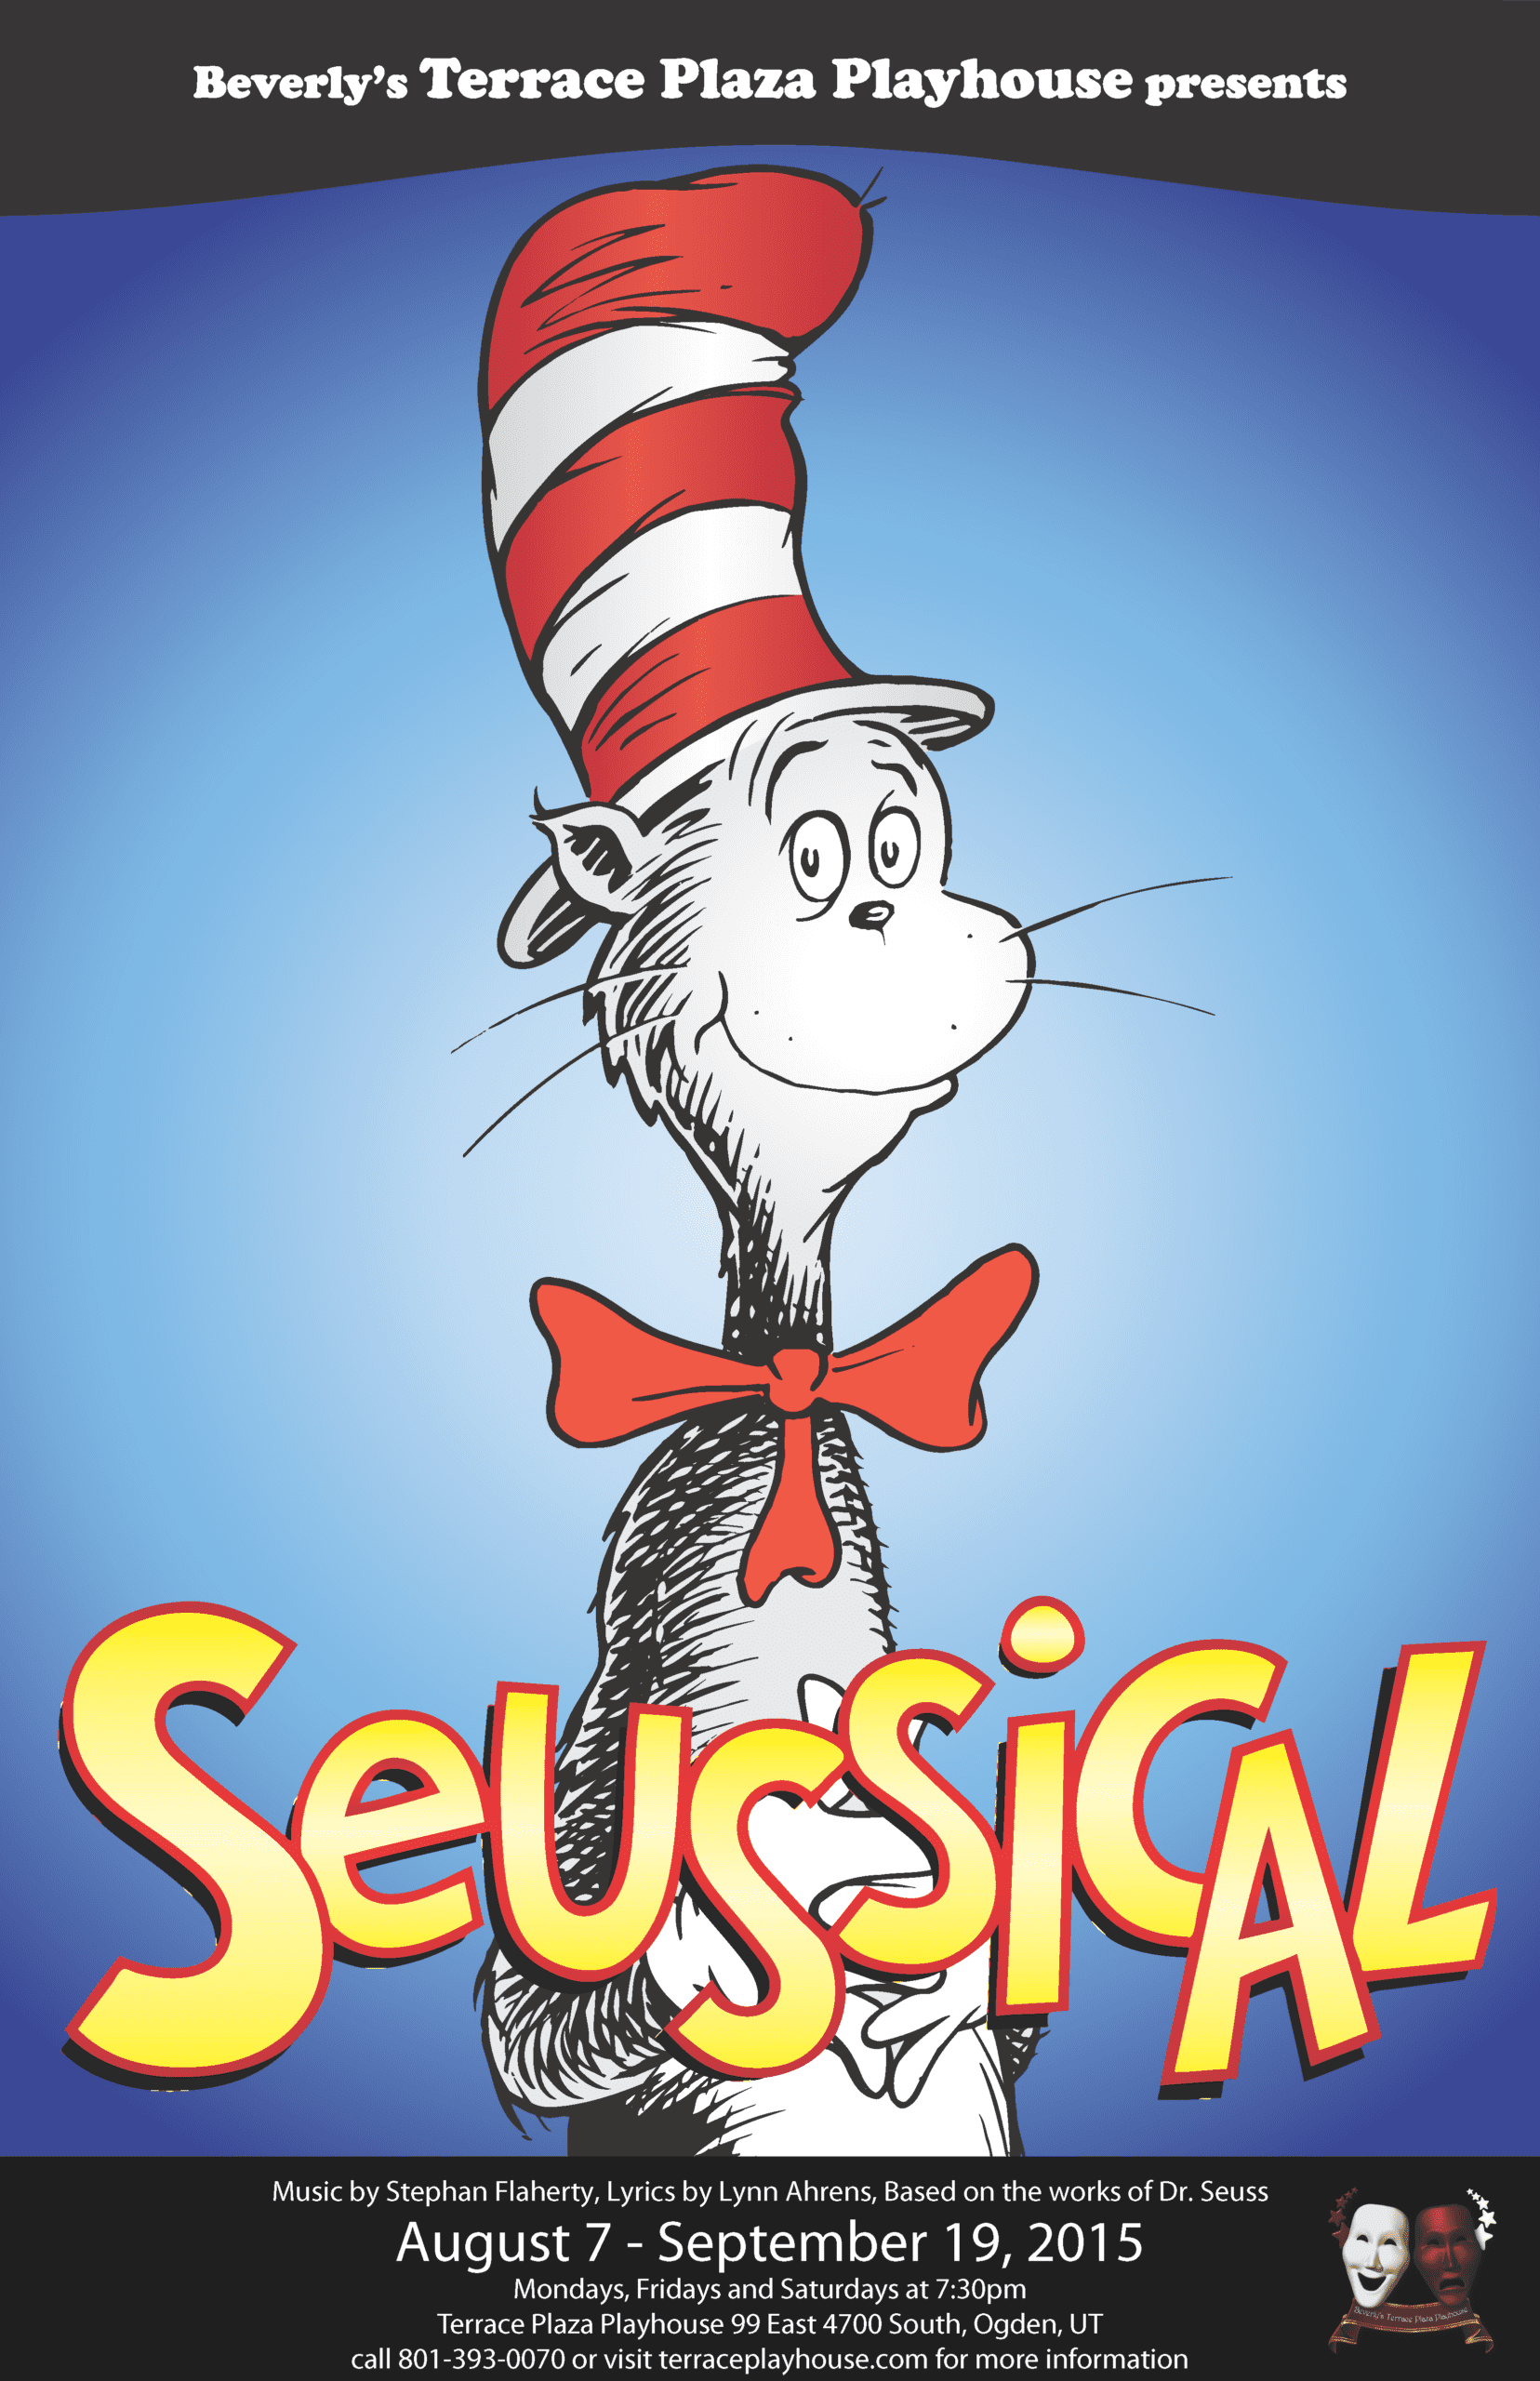 SEUSSICAL THE MUSICAL in Ogden is a ‘think’ to be thought